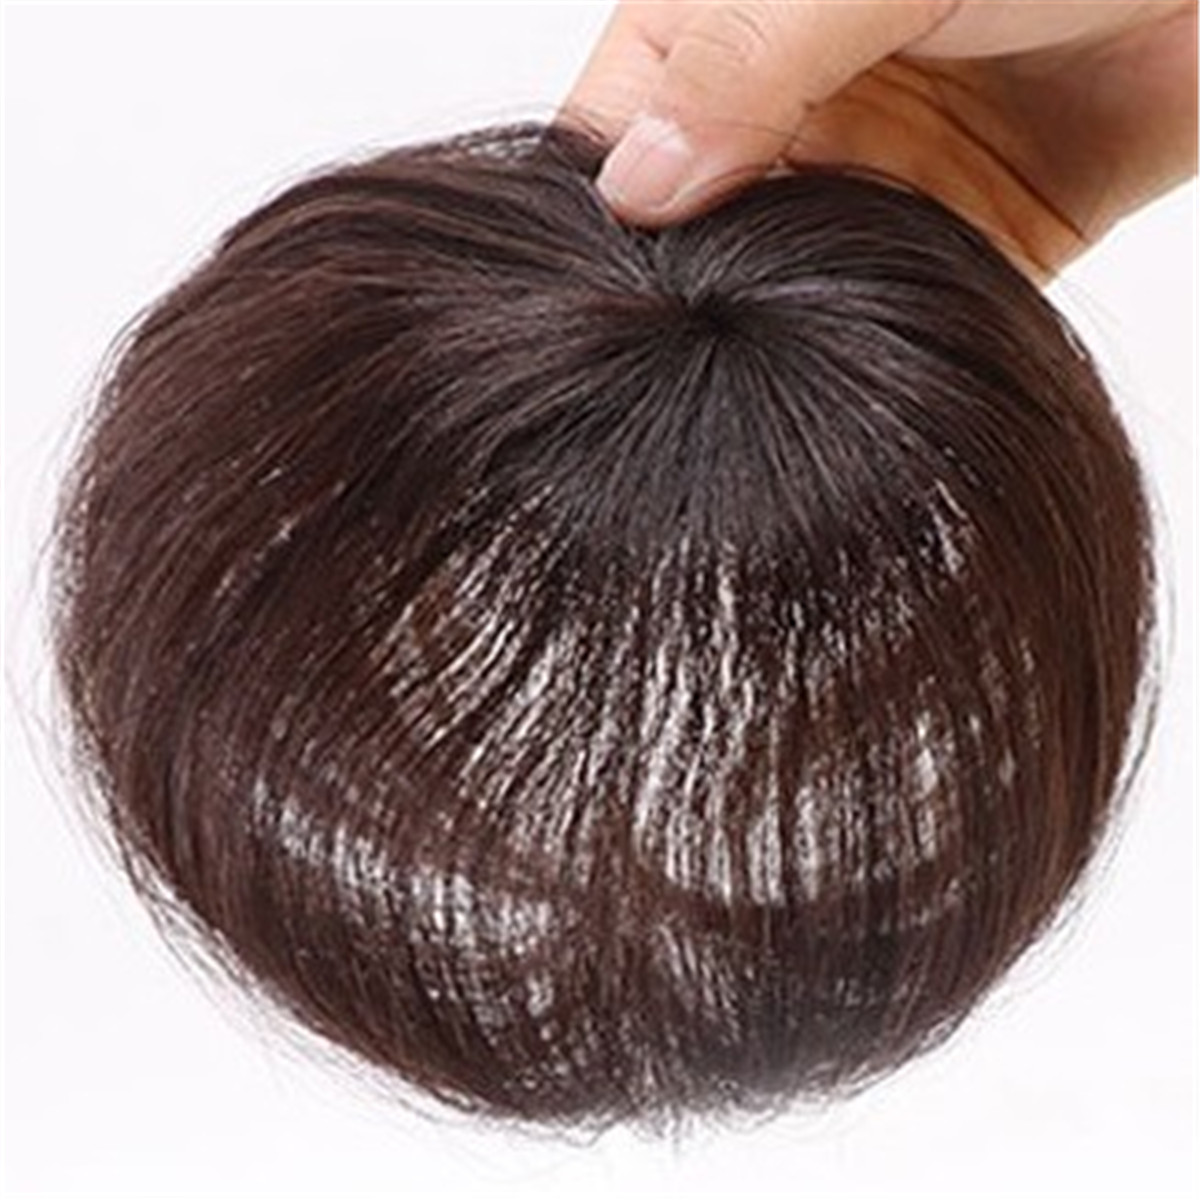 100 Real Human Hair Toupee Clip In Topper Natural Hairpiece Short Piece Women Ebay 